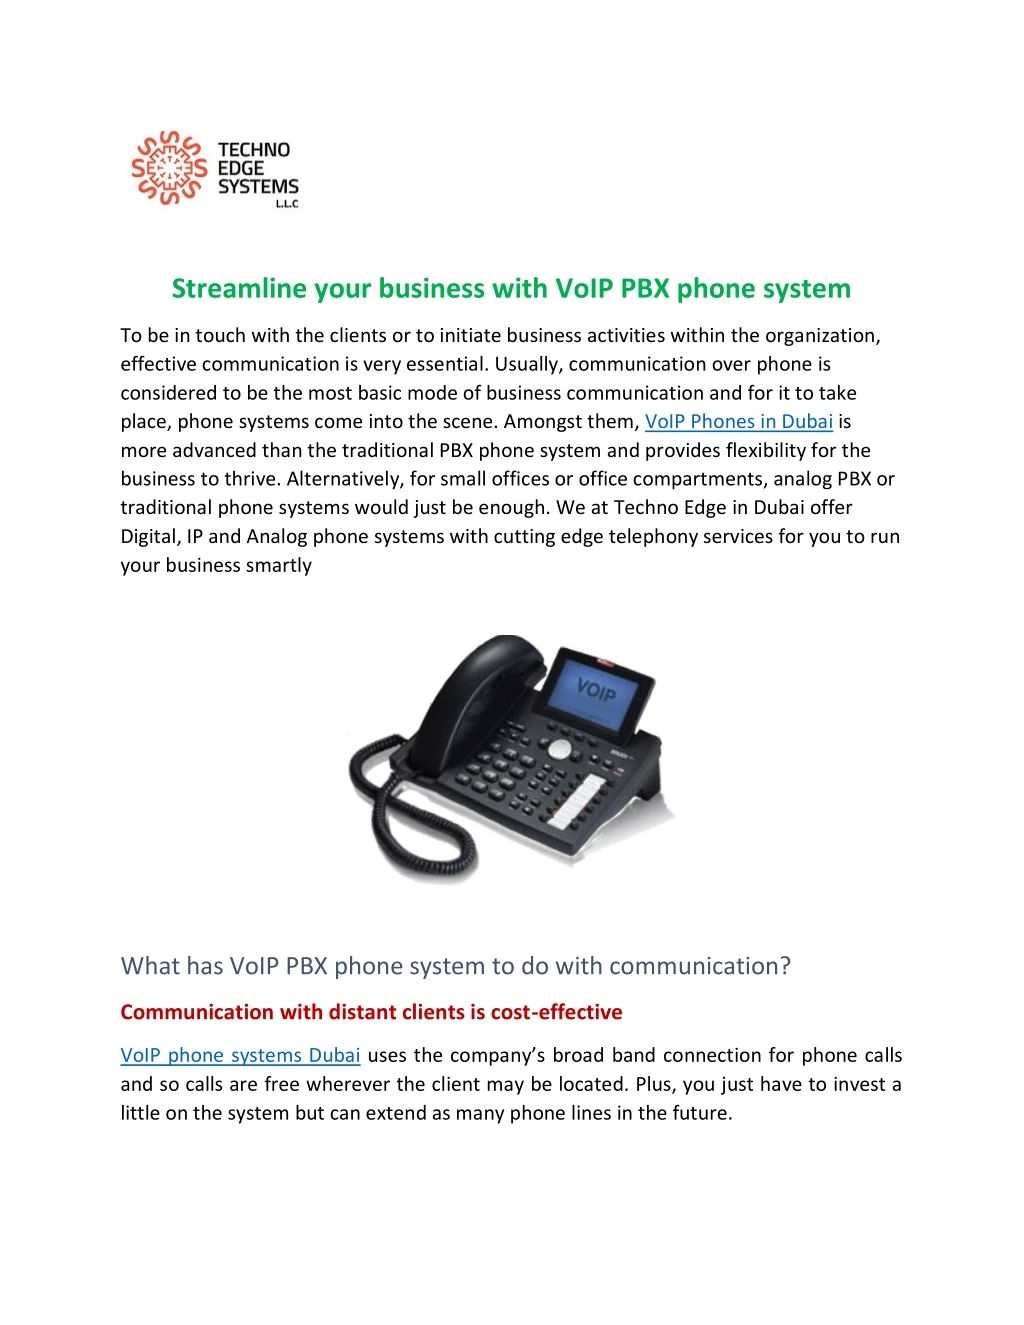 streamline your business with voip pbx phone